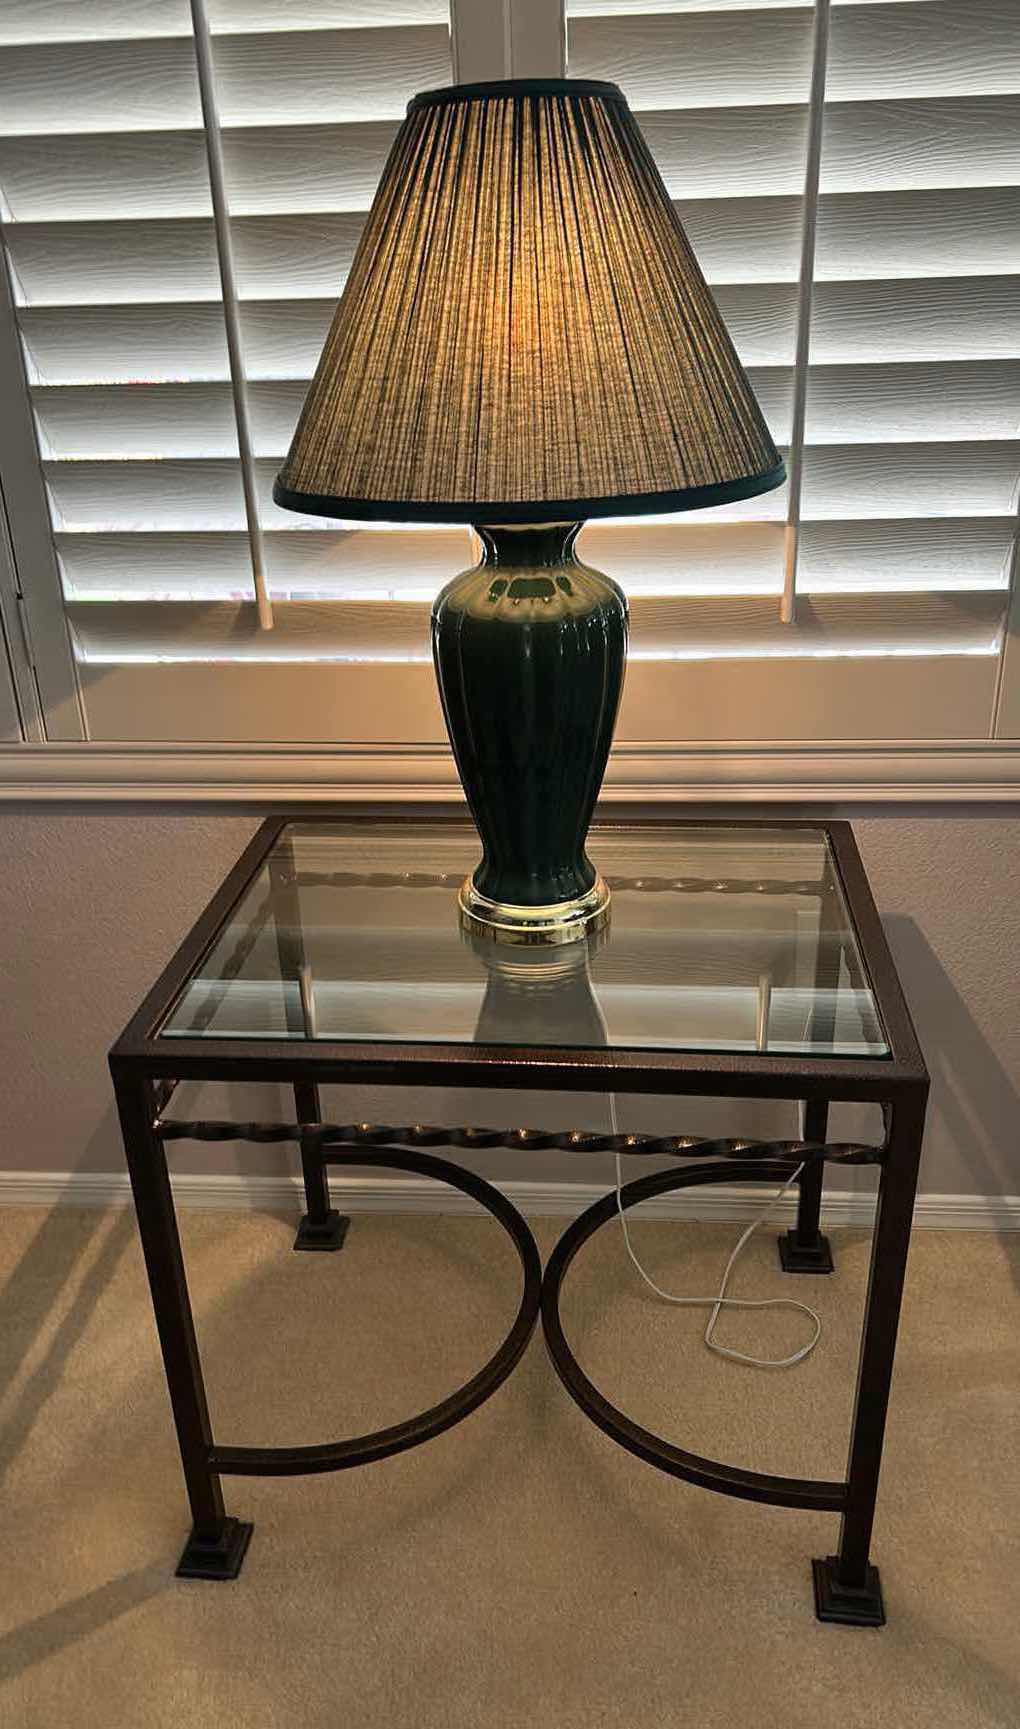 Photo 1 of METAL GLASS TOP TABLE WITH TABLE LAMP 28” x 22” x 24”